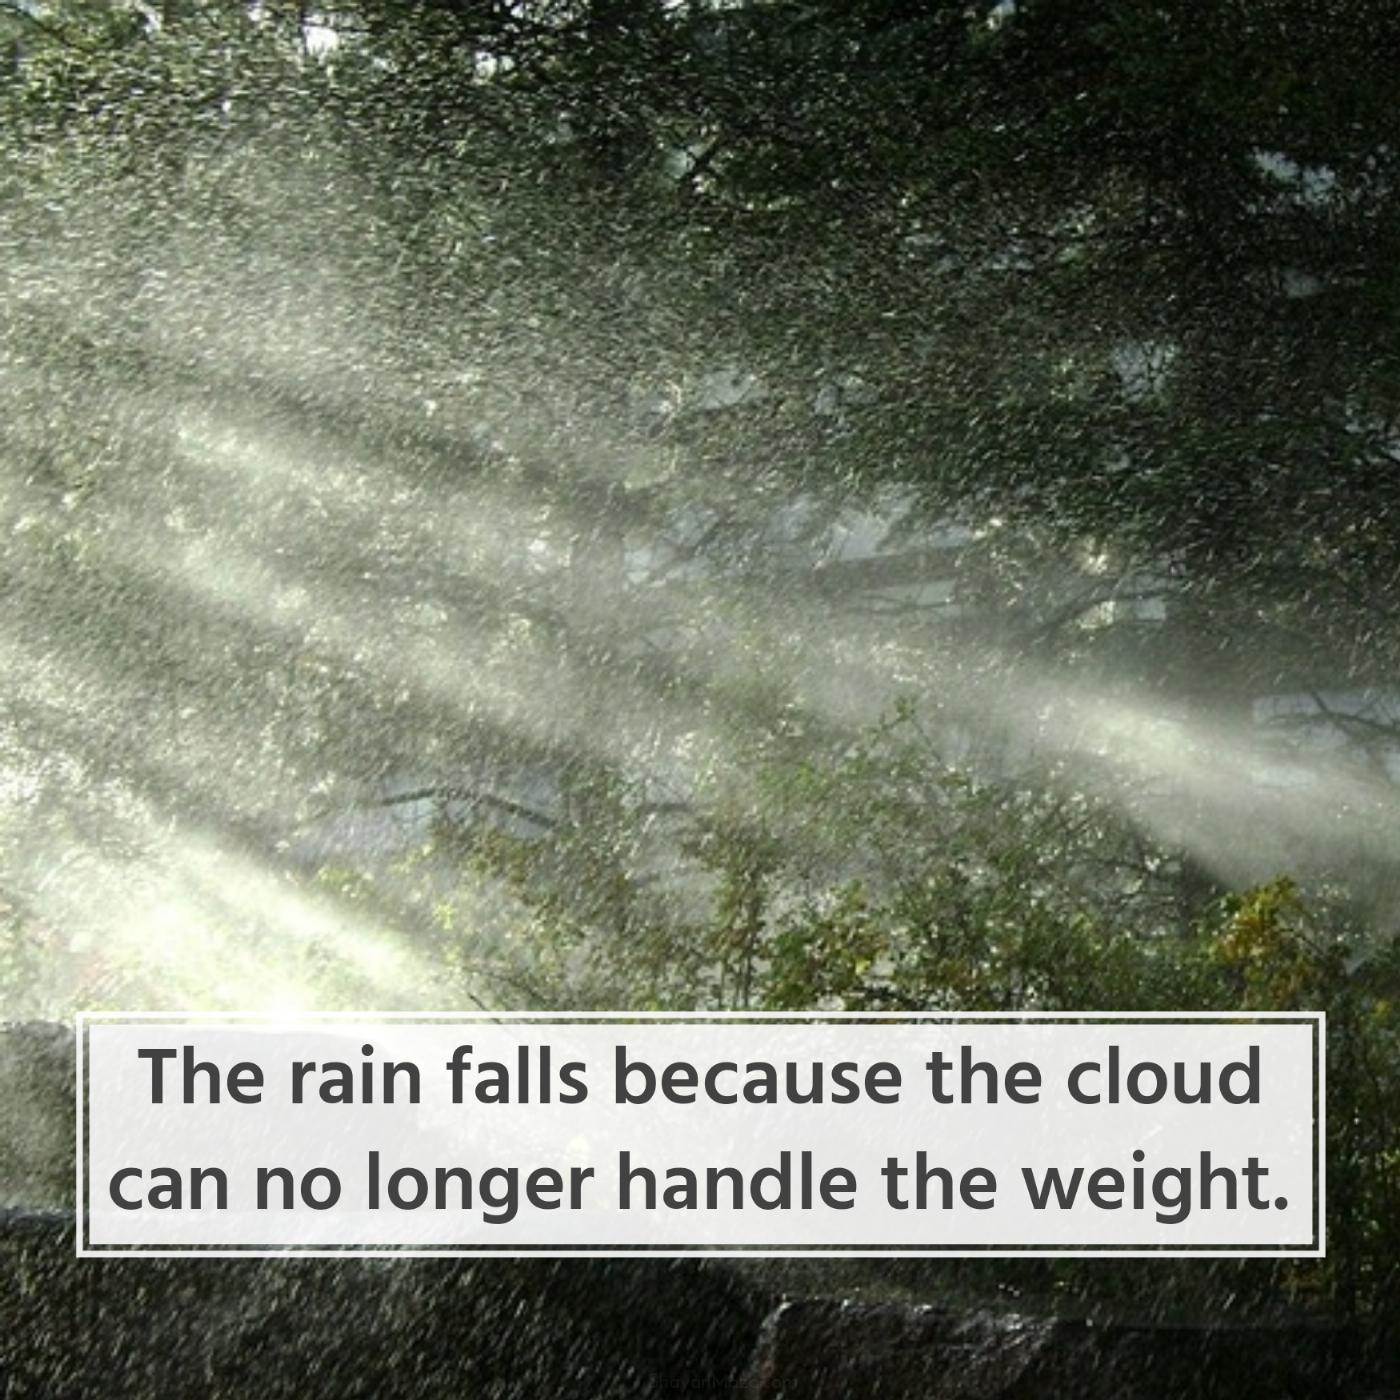 The rain falls because the cloud can no longer handle the weight